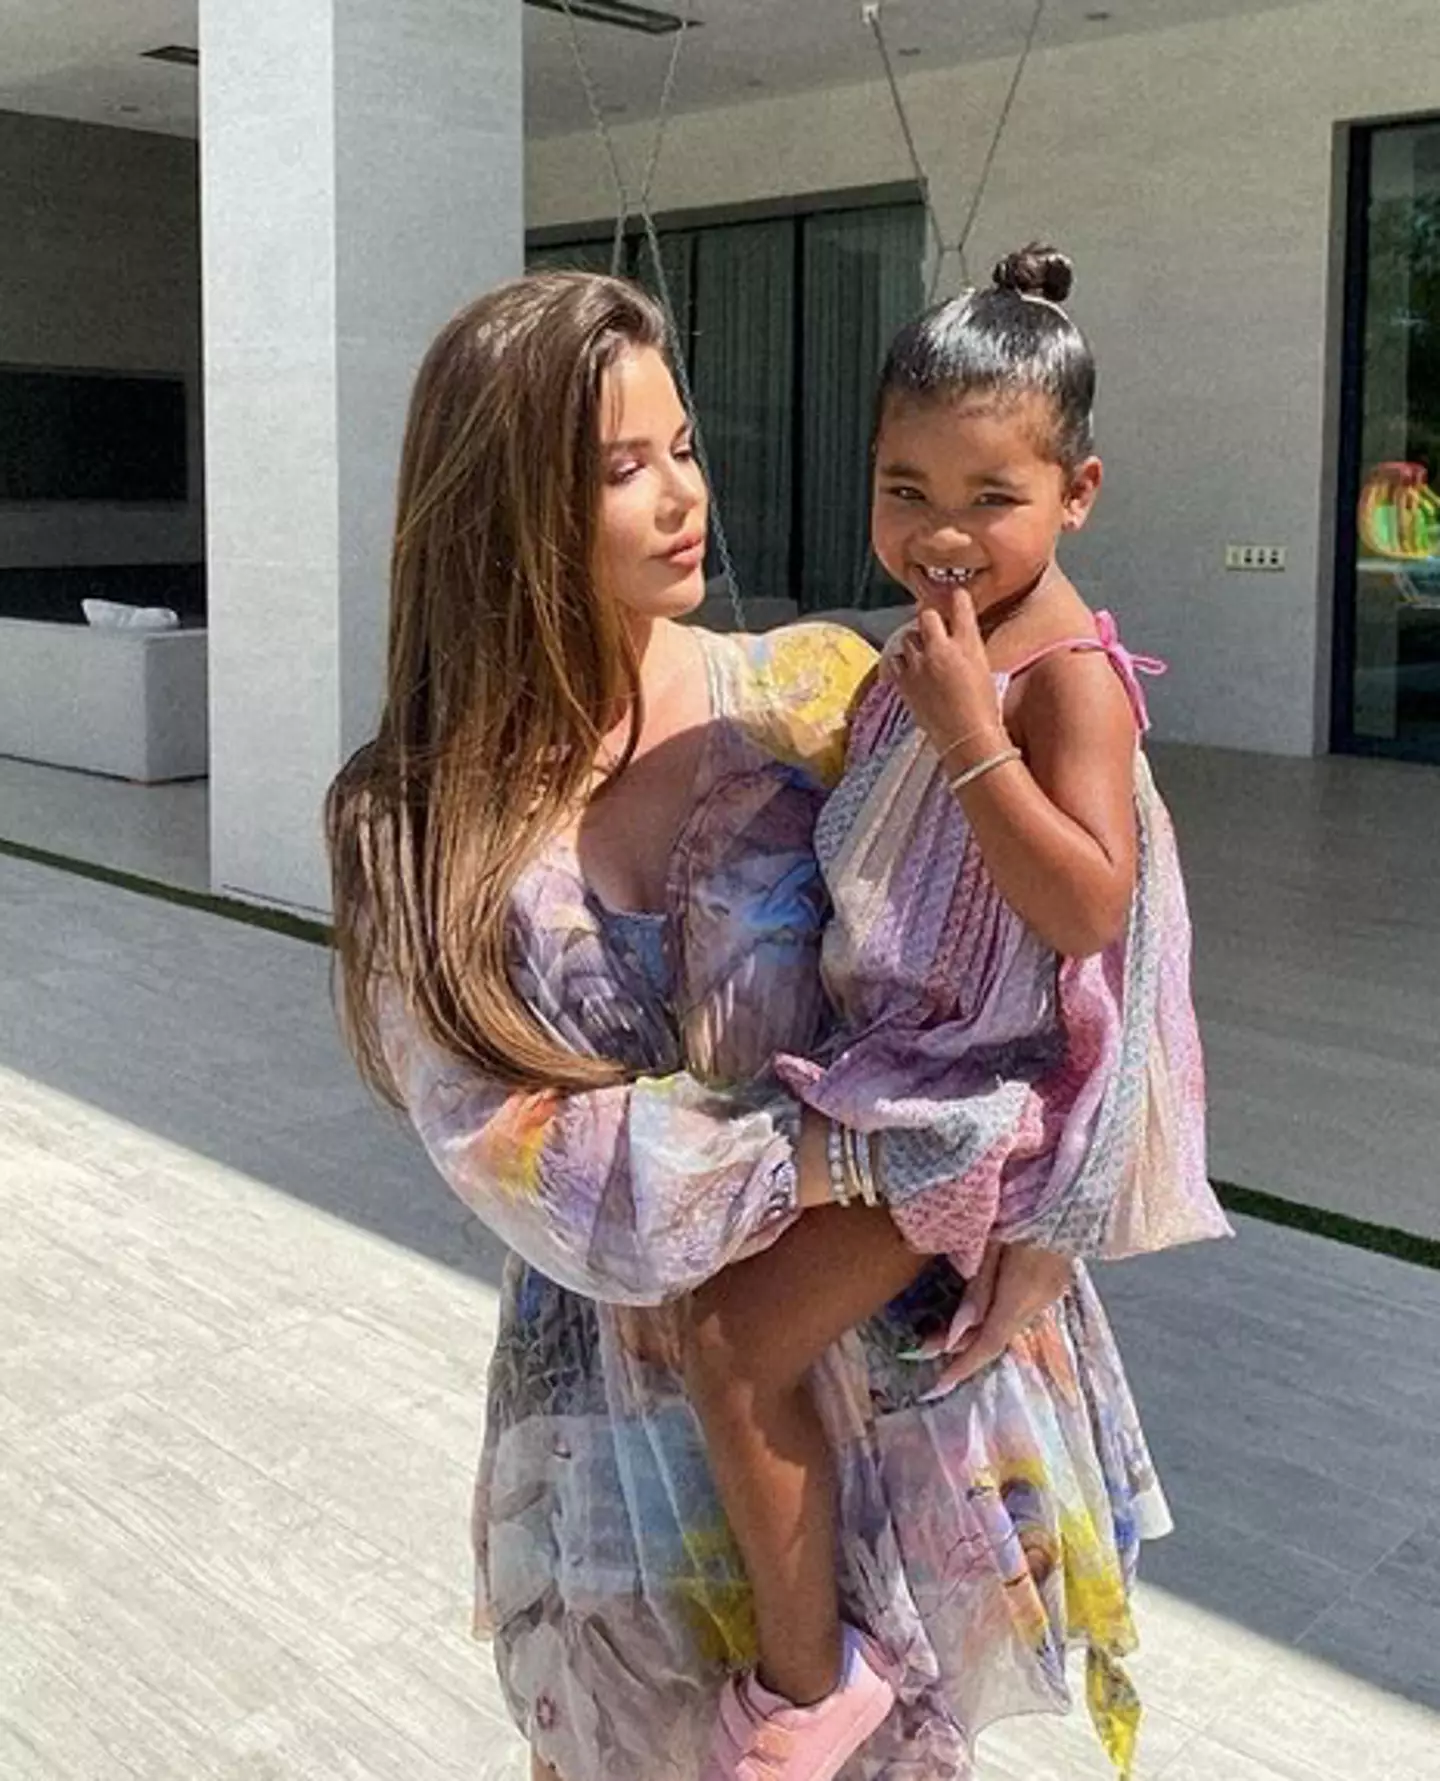 Khloe is protective of her baby girl (